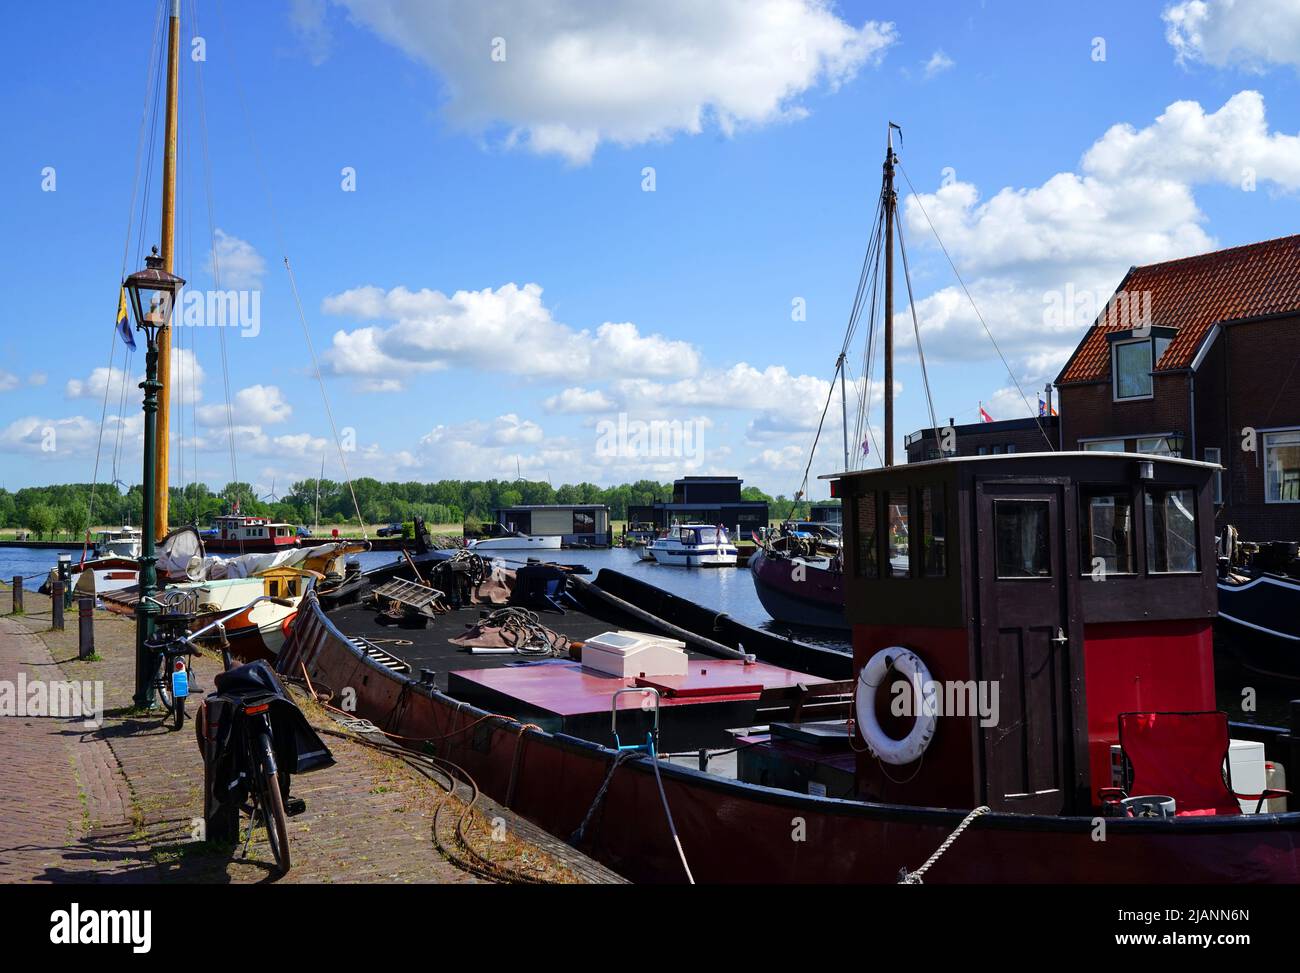 Pituresque picture of the old port of Spakenburg. Old fishing boats, bicycles, a lamppost. Everything typically Dutch Stock Photo